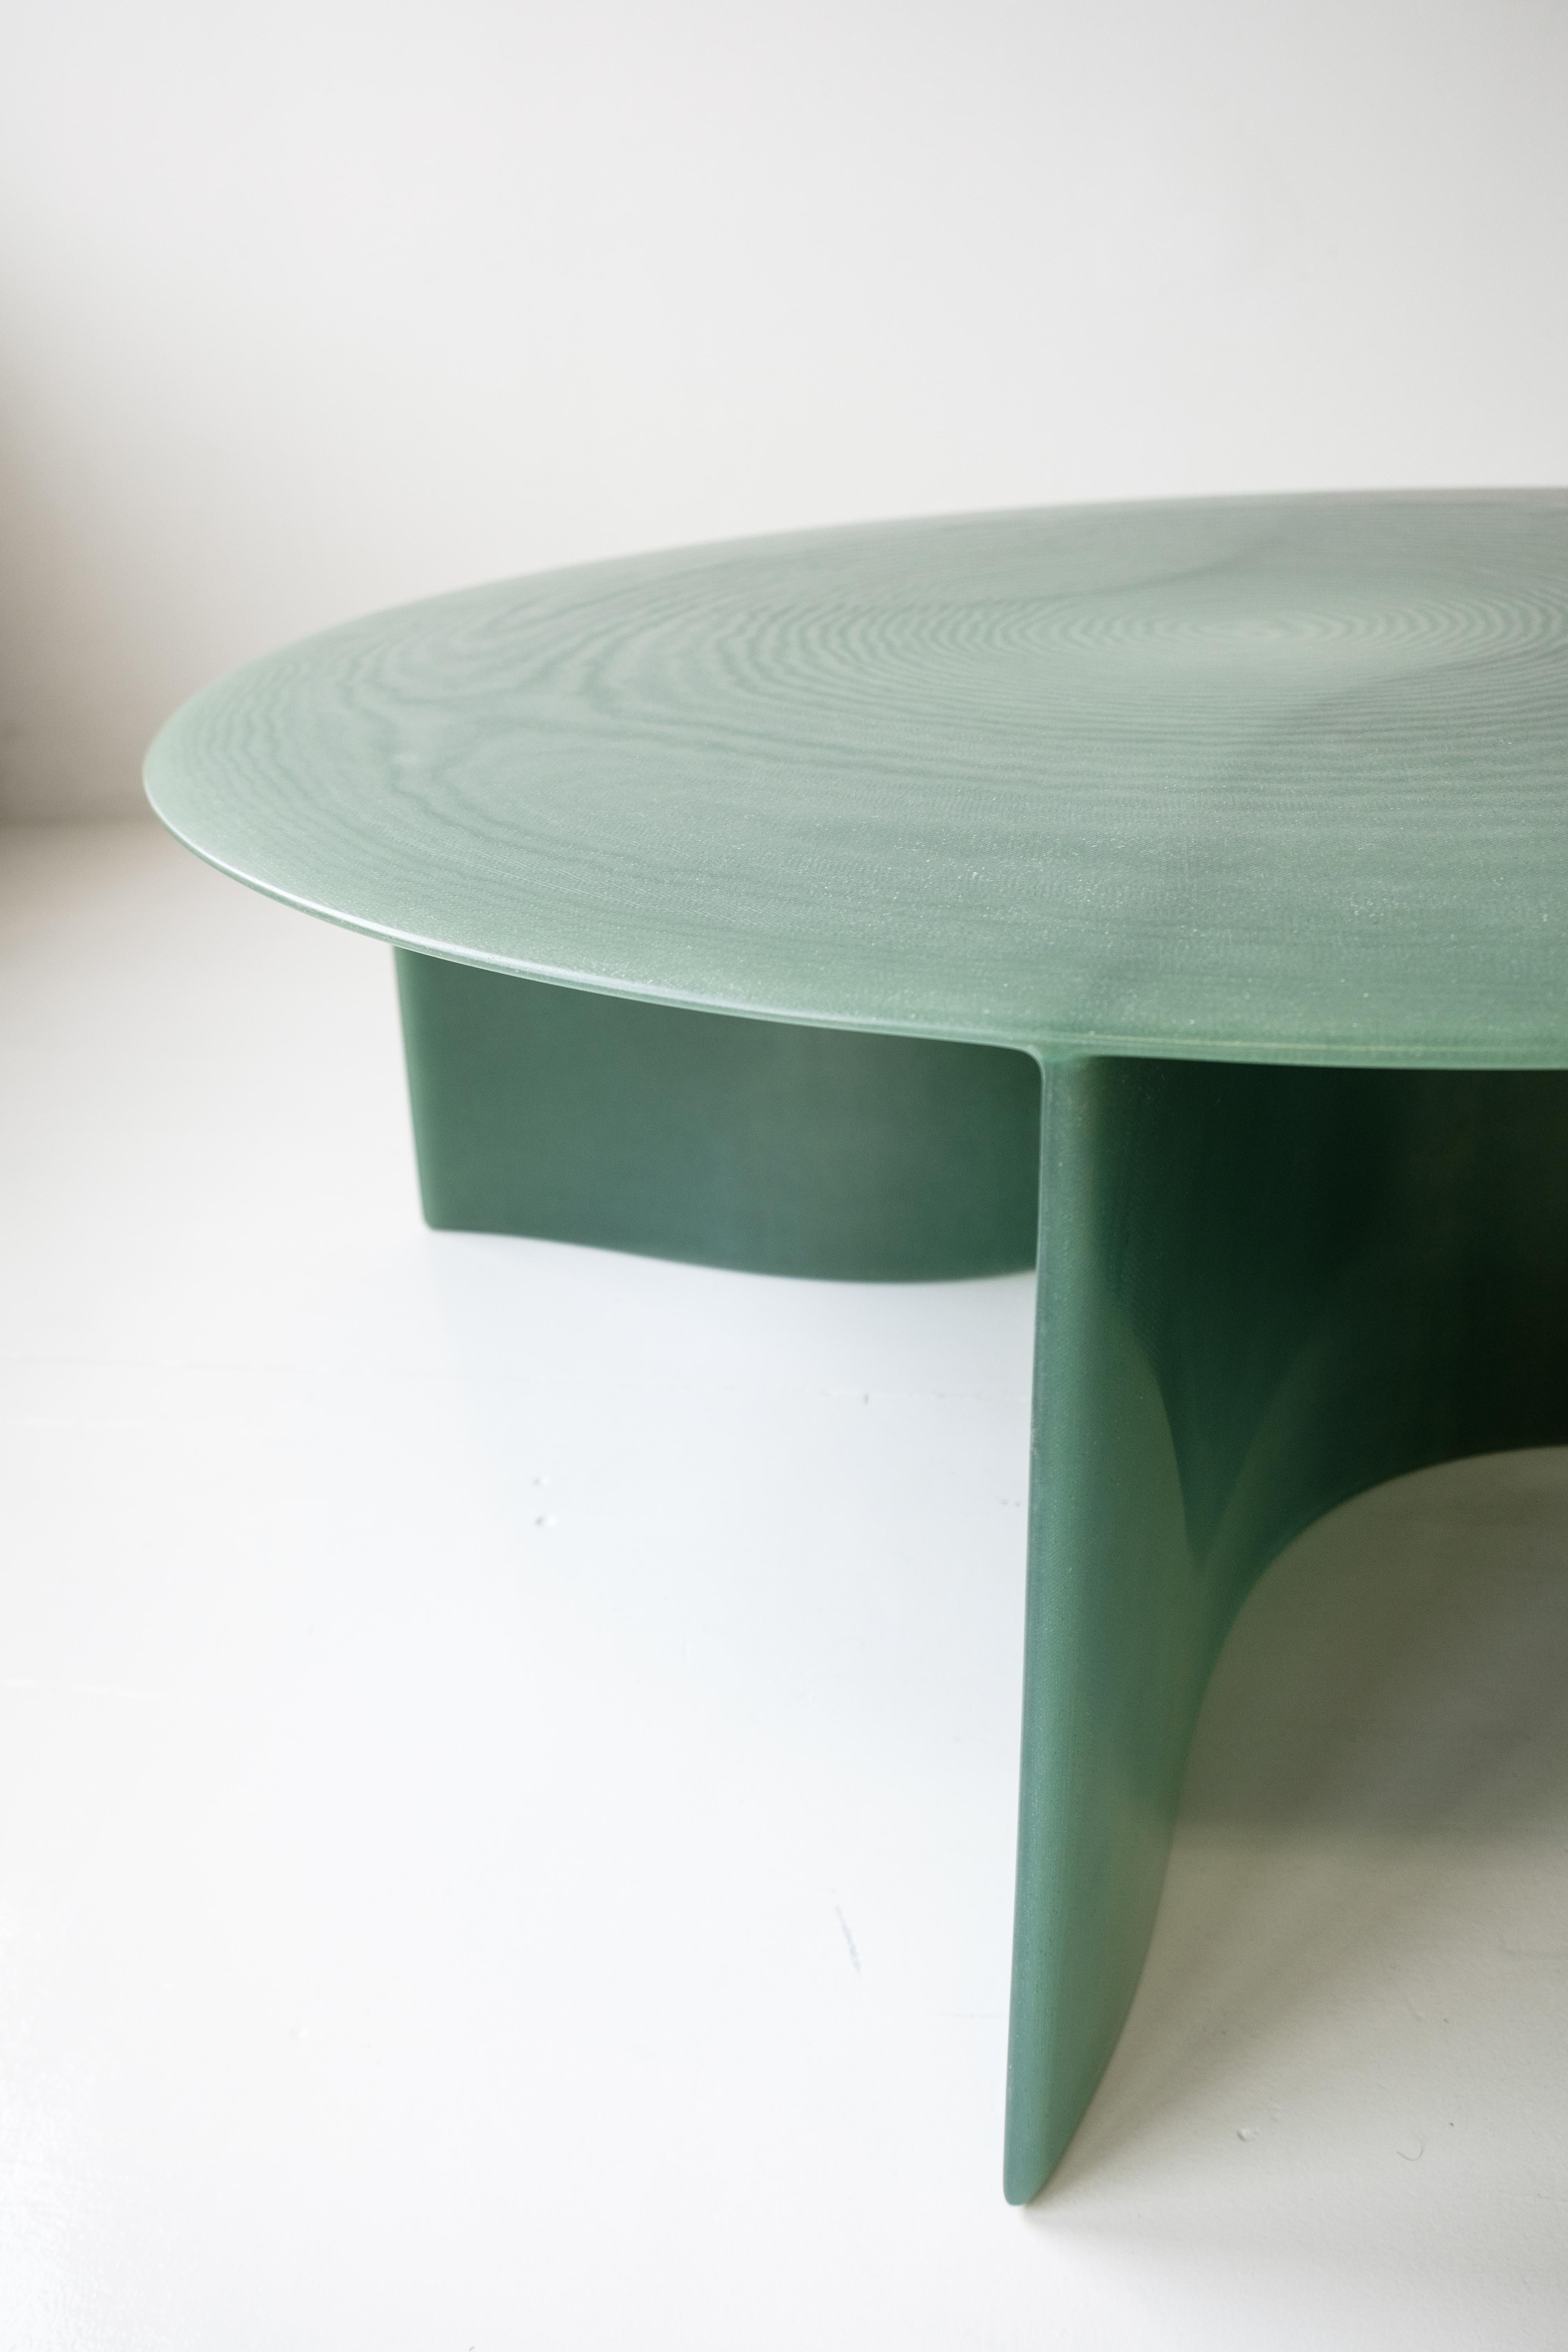 Resin Contemporary Green Fiberglass, New Wave Coffee Table Round 120cm, by Lukas Cober